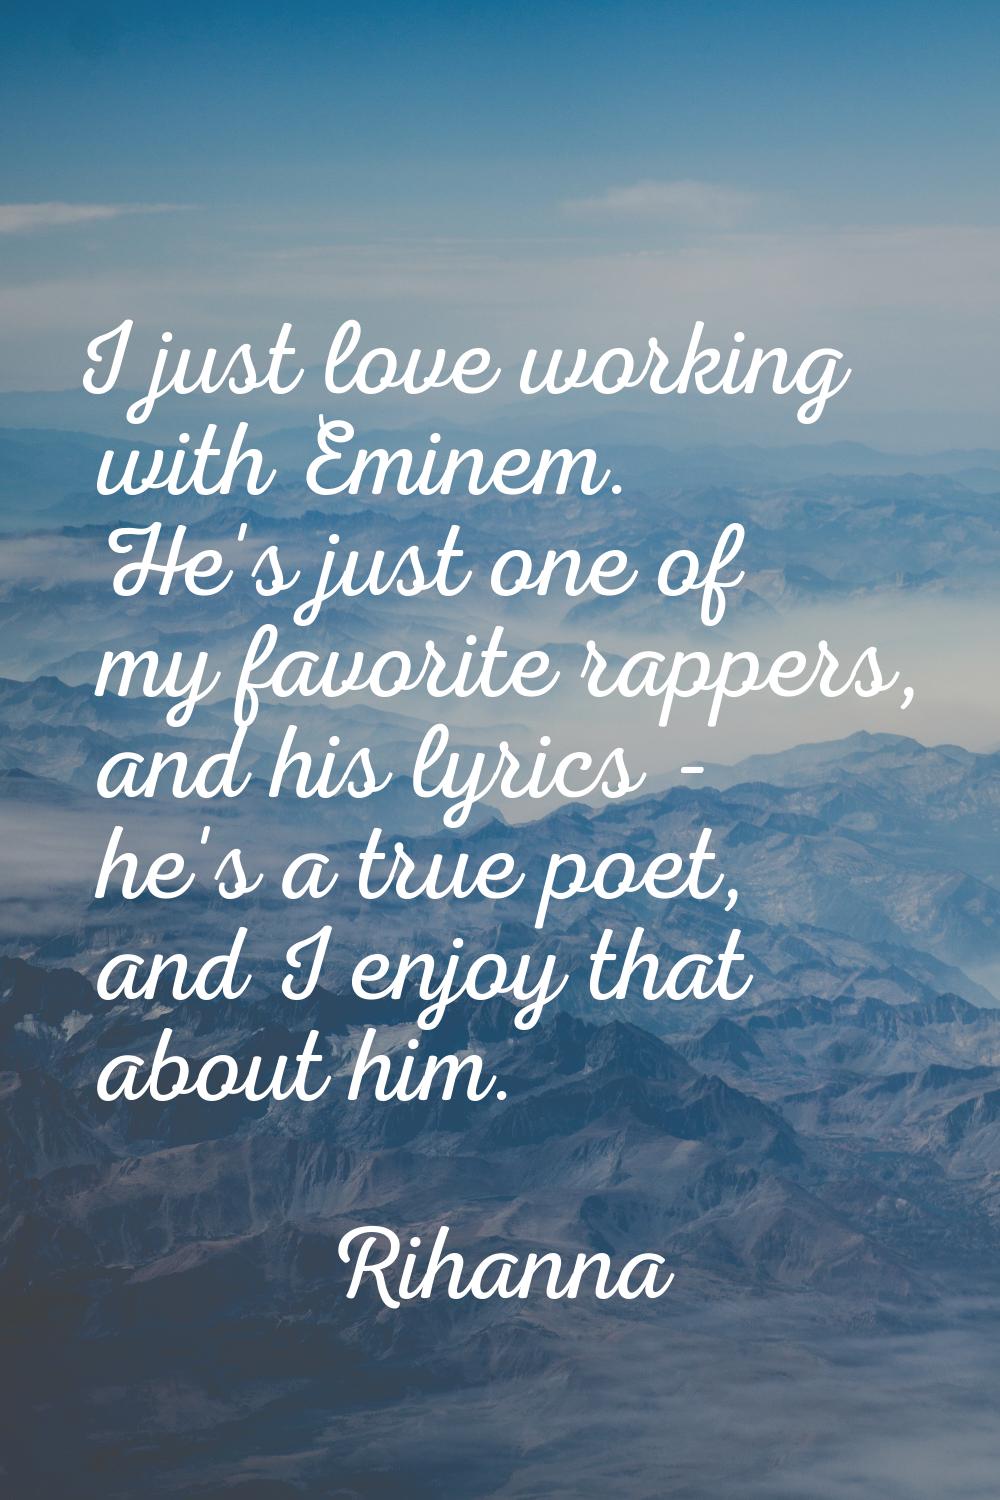 I just love working with Eminem. He's just one of my favorite rappers, and his lyrics - he's a true